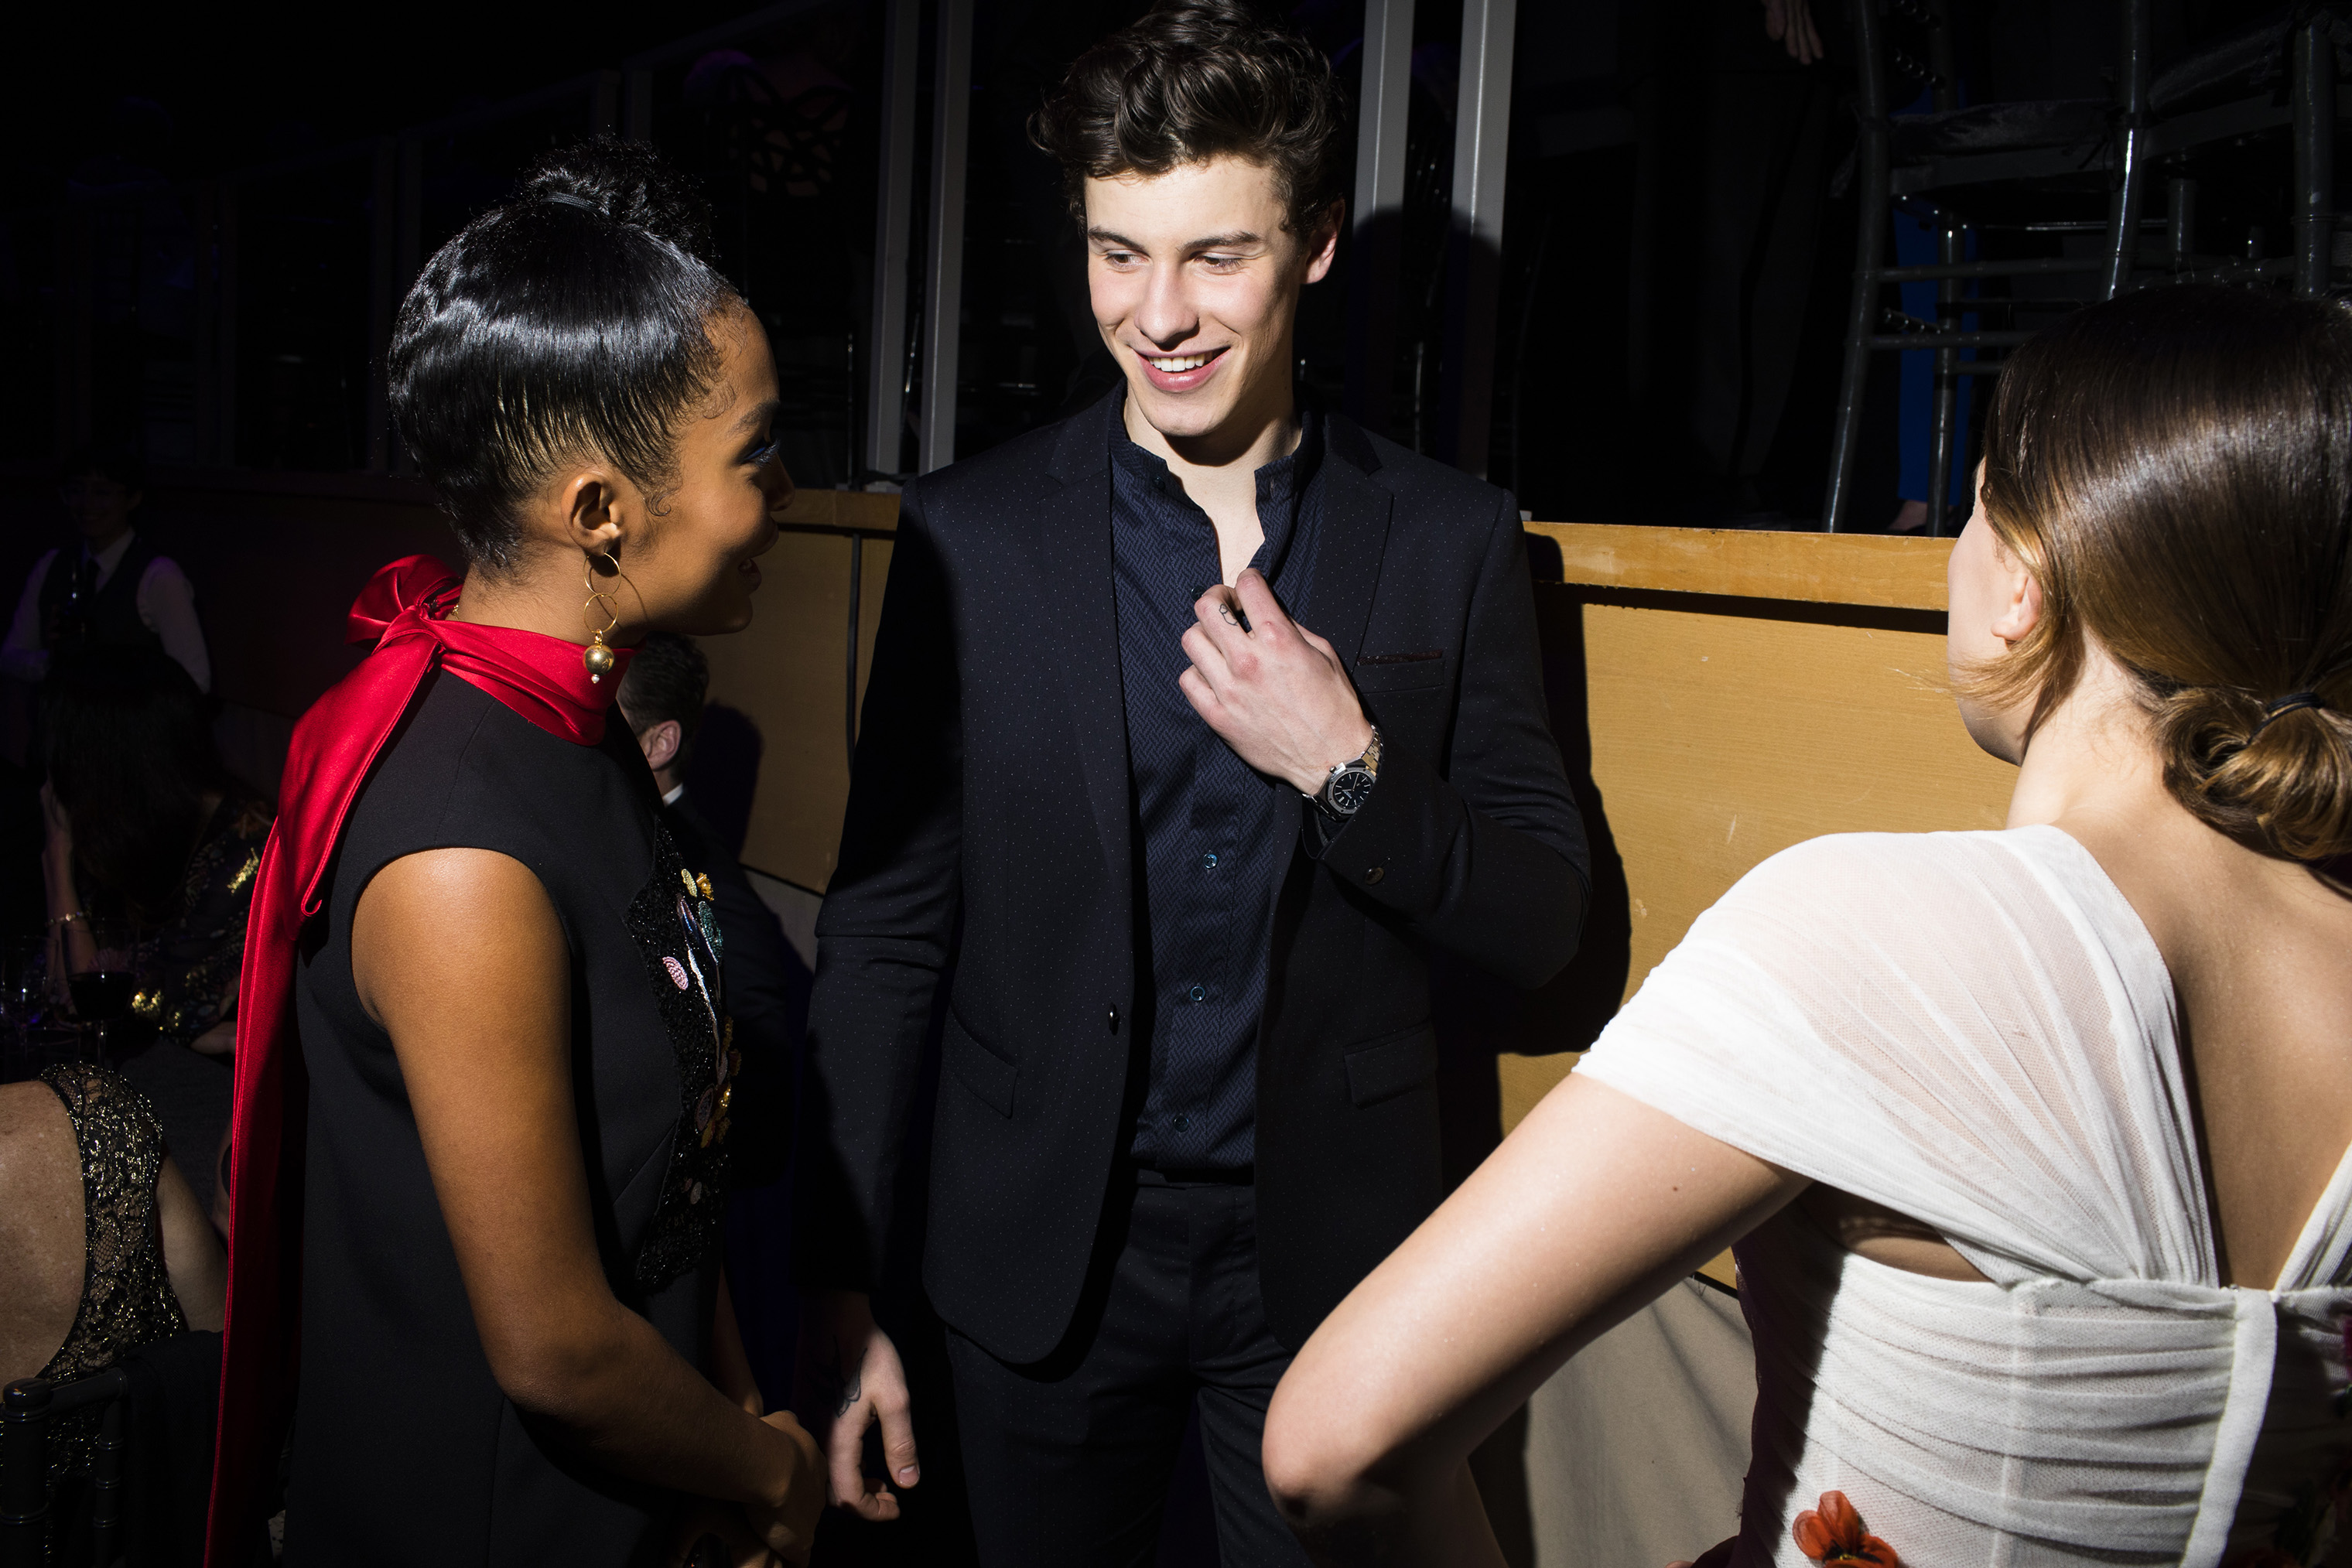 Yara Shahidi, Shawn Mendes and Millie Bobby Brown at the Time 100 Gala at Jazz at Lincoln Center on April 24, 2018 in New York City. (Landon Nordeman for TIME)